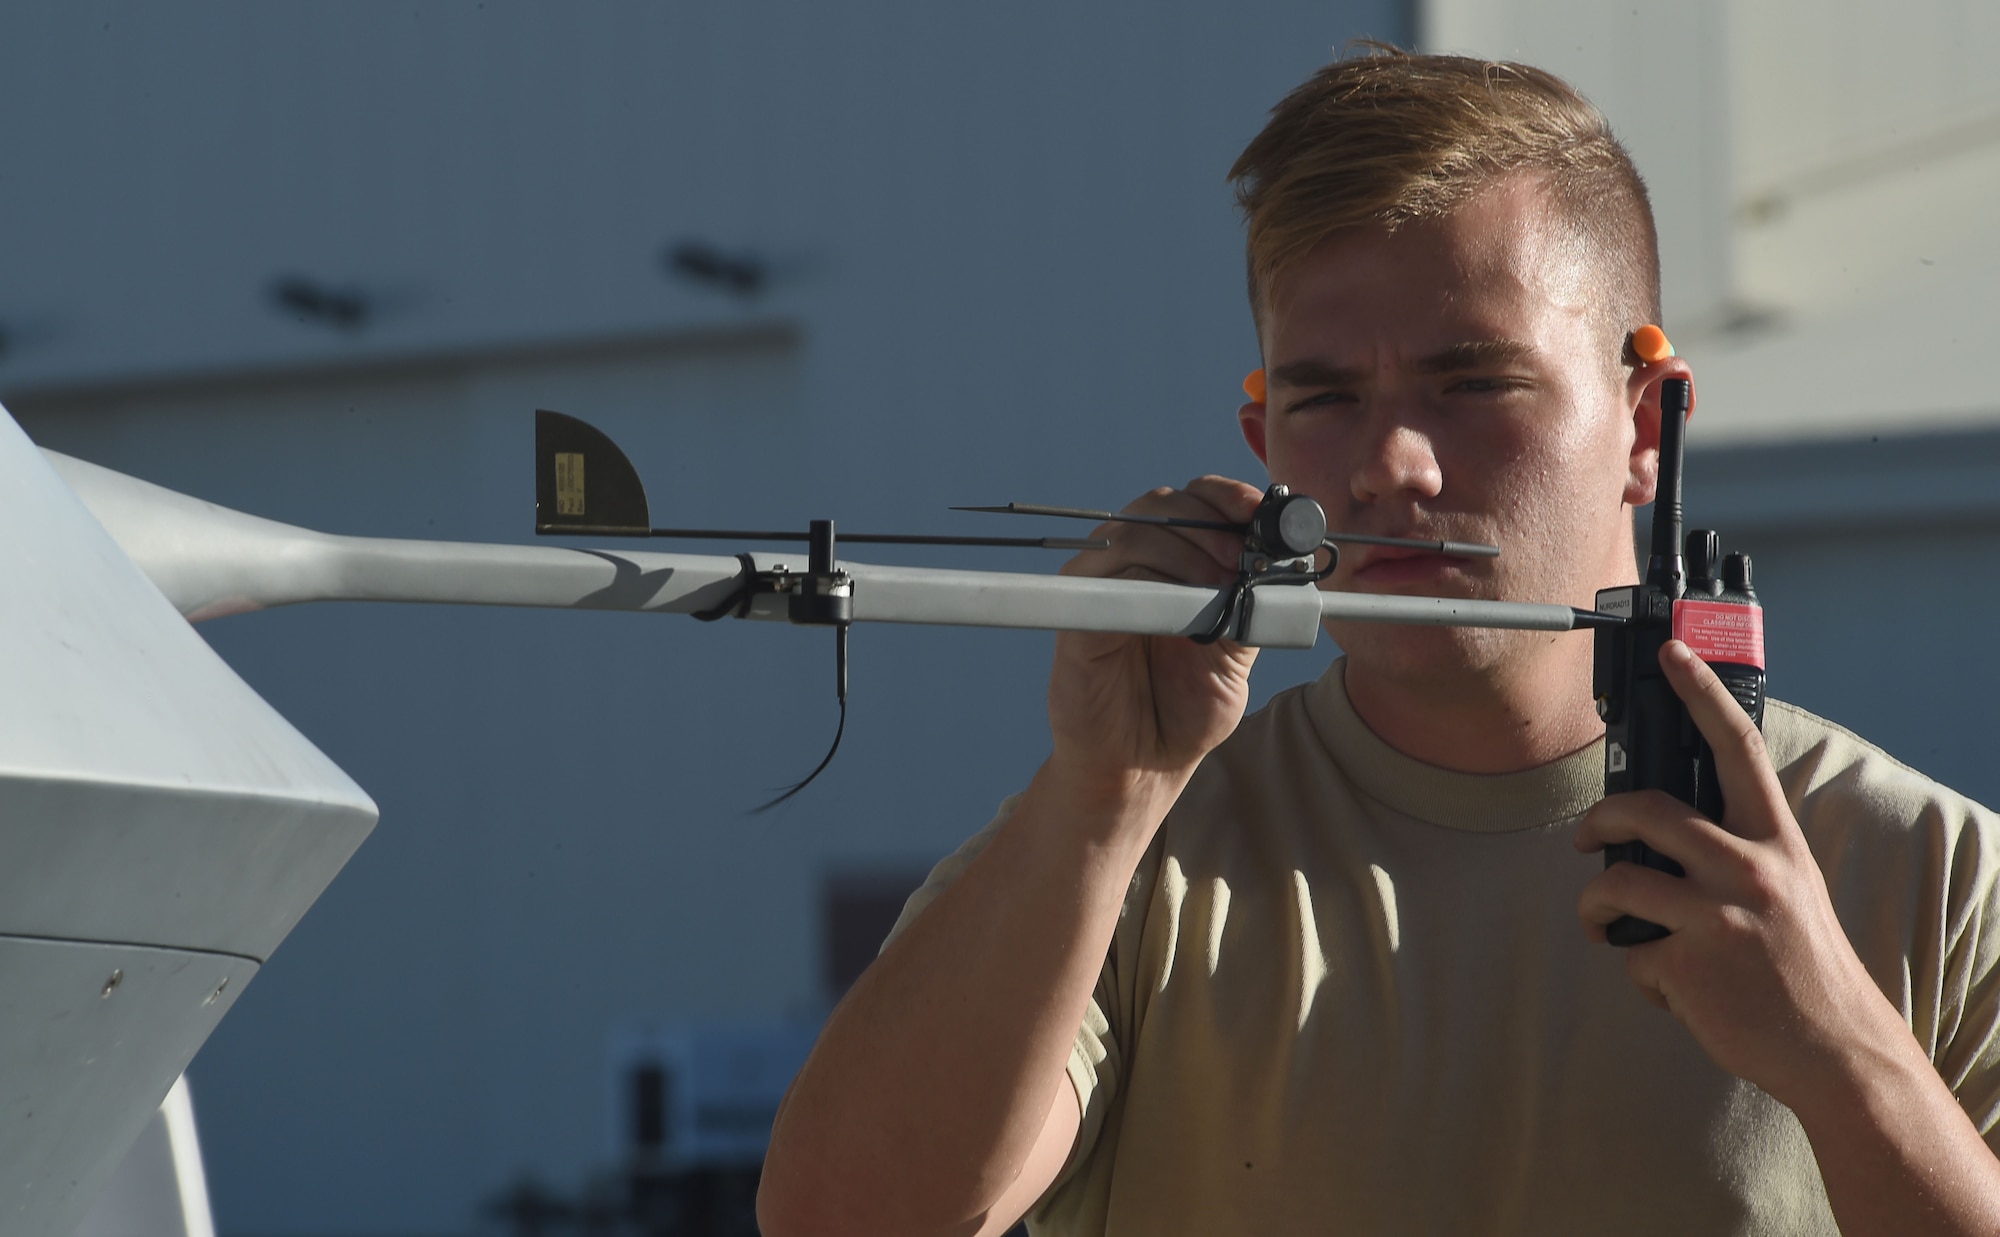 Airman 1st Class Conner, a crew chief assigned to 432nd Aircraft Maintenance Squadron, performs a pre-flight check on an MQ-9 Reaper before its departure to support Red Flag 16-3 July 19, 2016, at Creech Air Force Base, Nevada. The exercise consists of realistic training scenarios that prepare aircrews for future combat operations. (U.S. Air Force photo by Airman 1st Class James Thompson/Released)